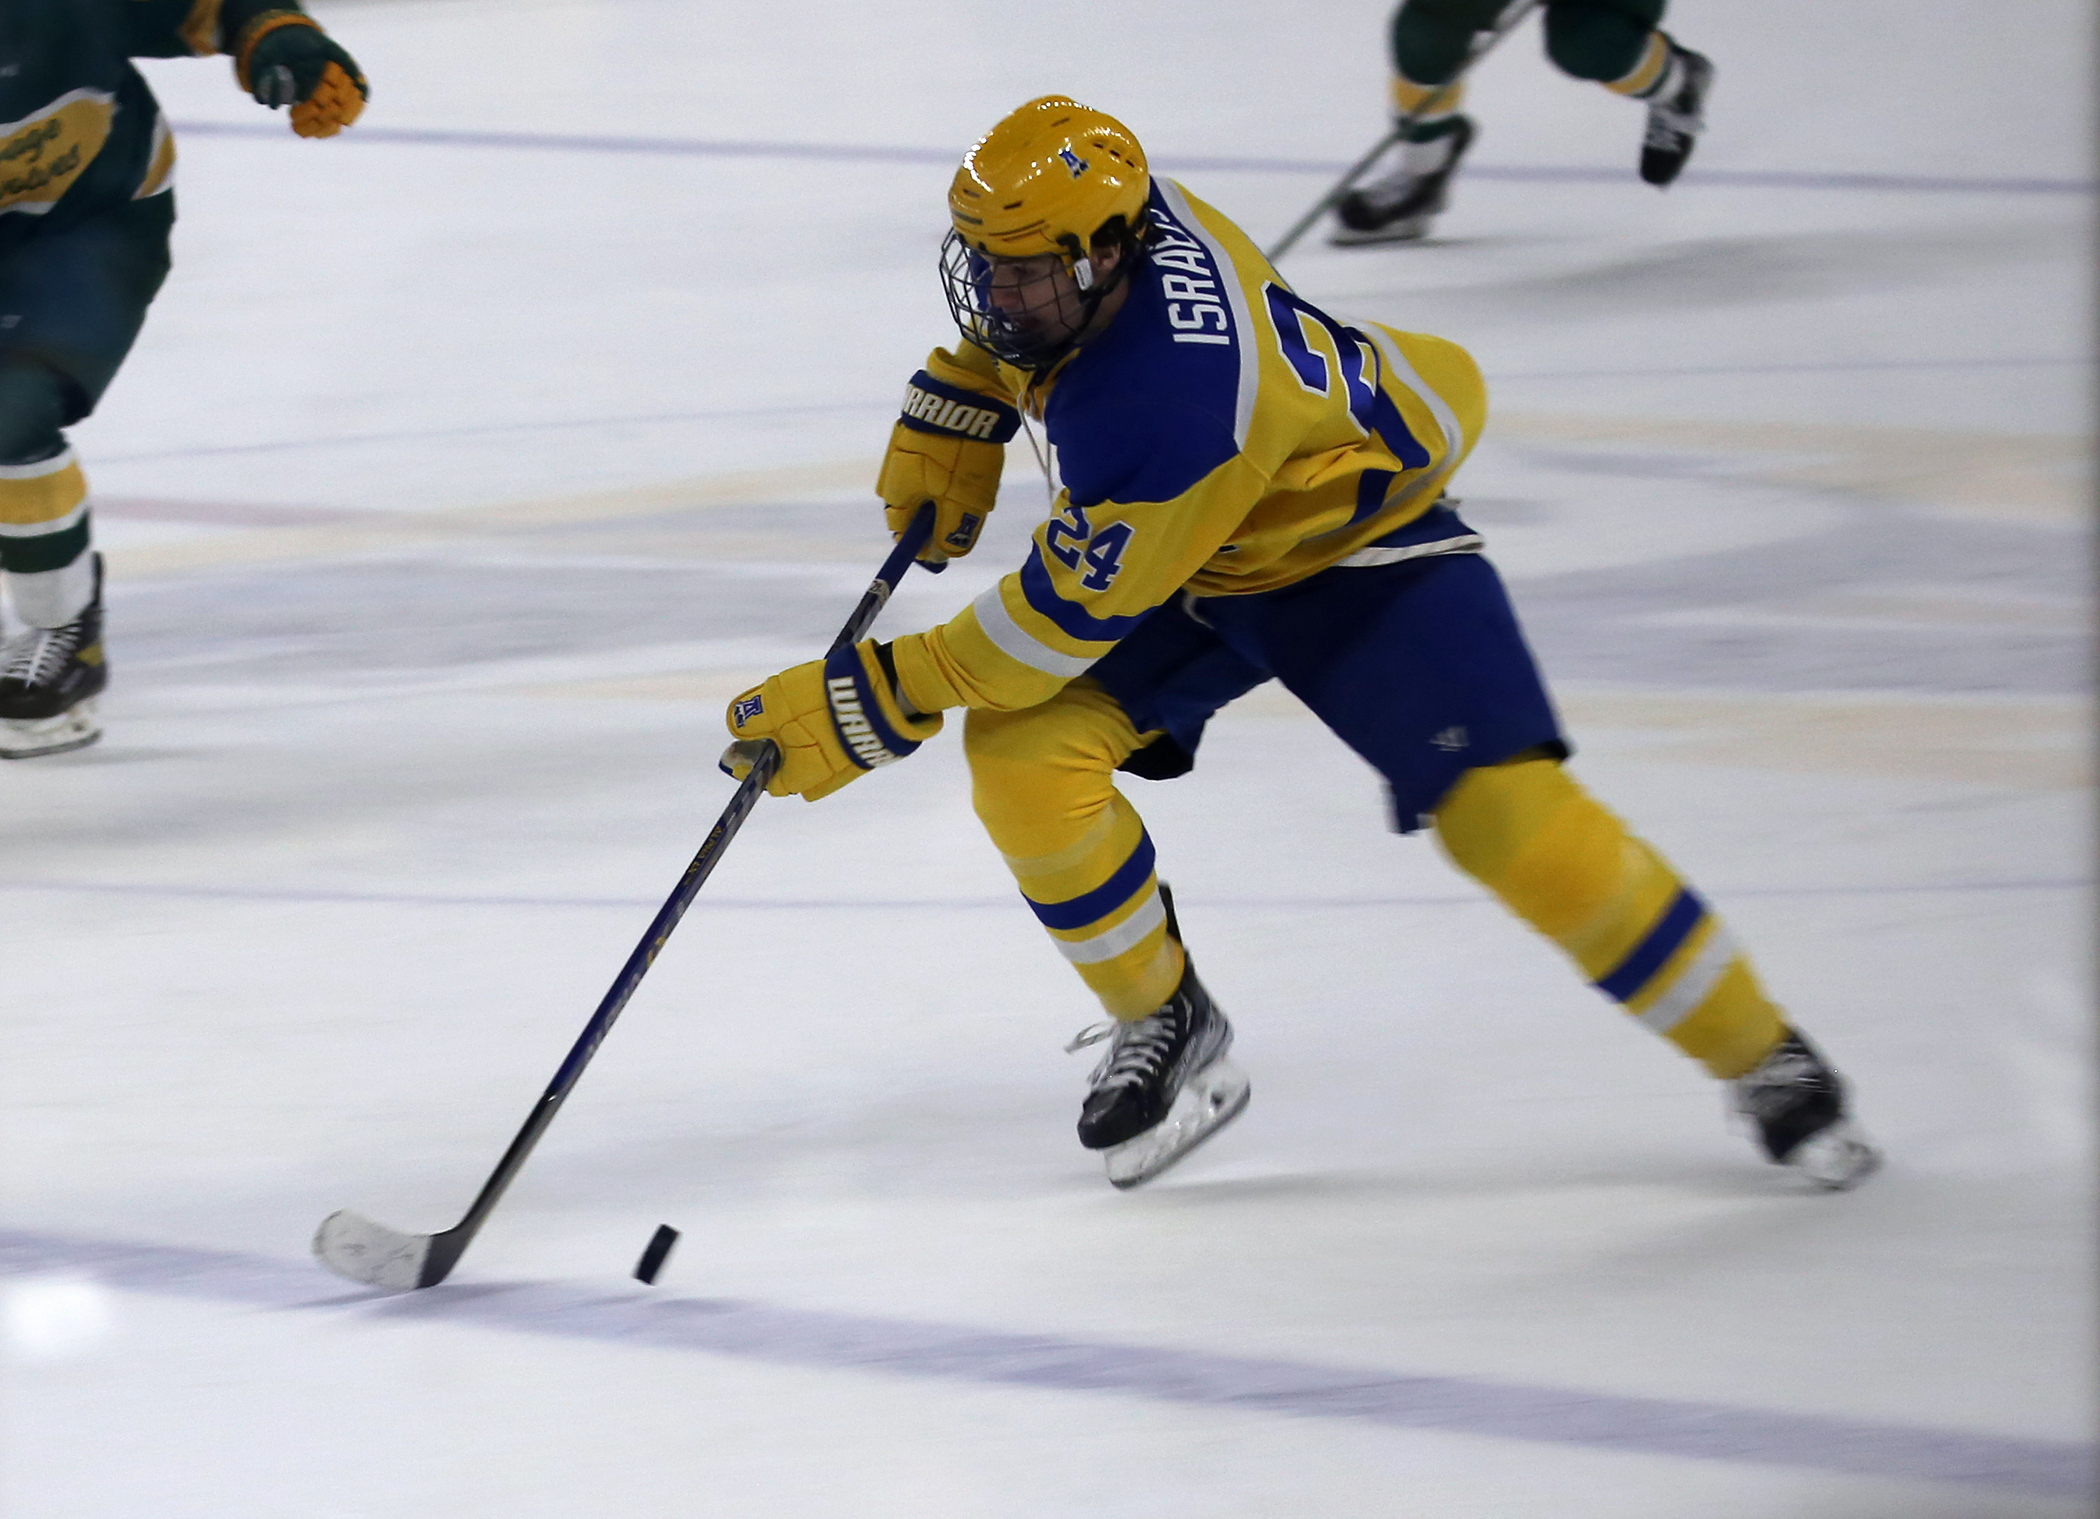 Nanooks forward Harrison Israels rushes the puck forward in a push toward the Seawolves' net and 'Nooks forward Brady Risk who slotted the winner home only 58 seconds into the overtime period.